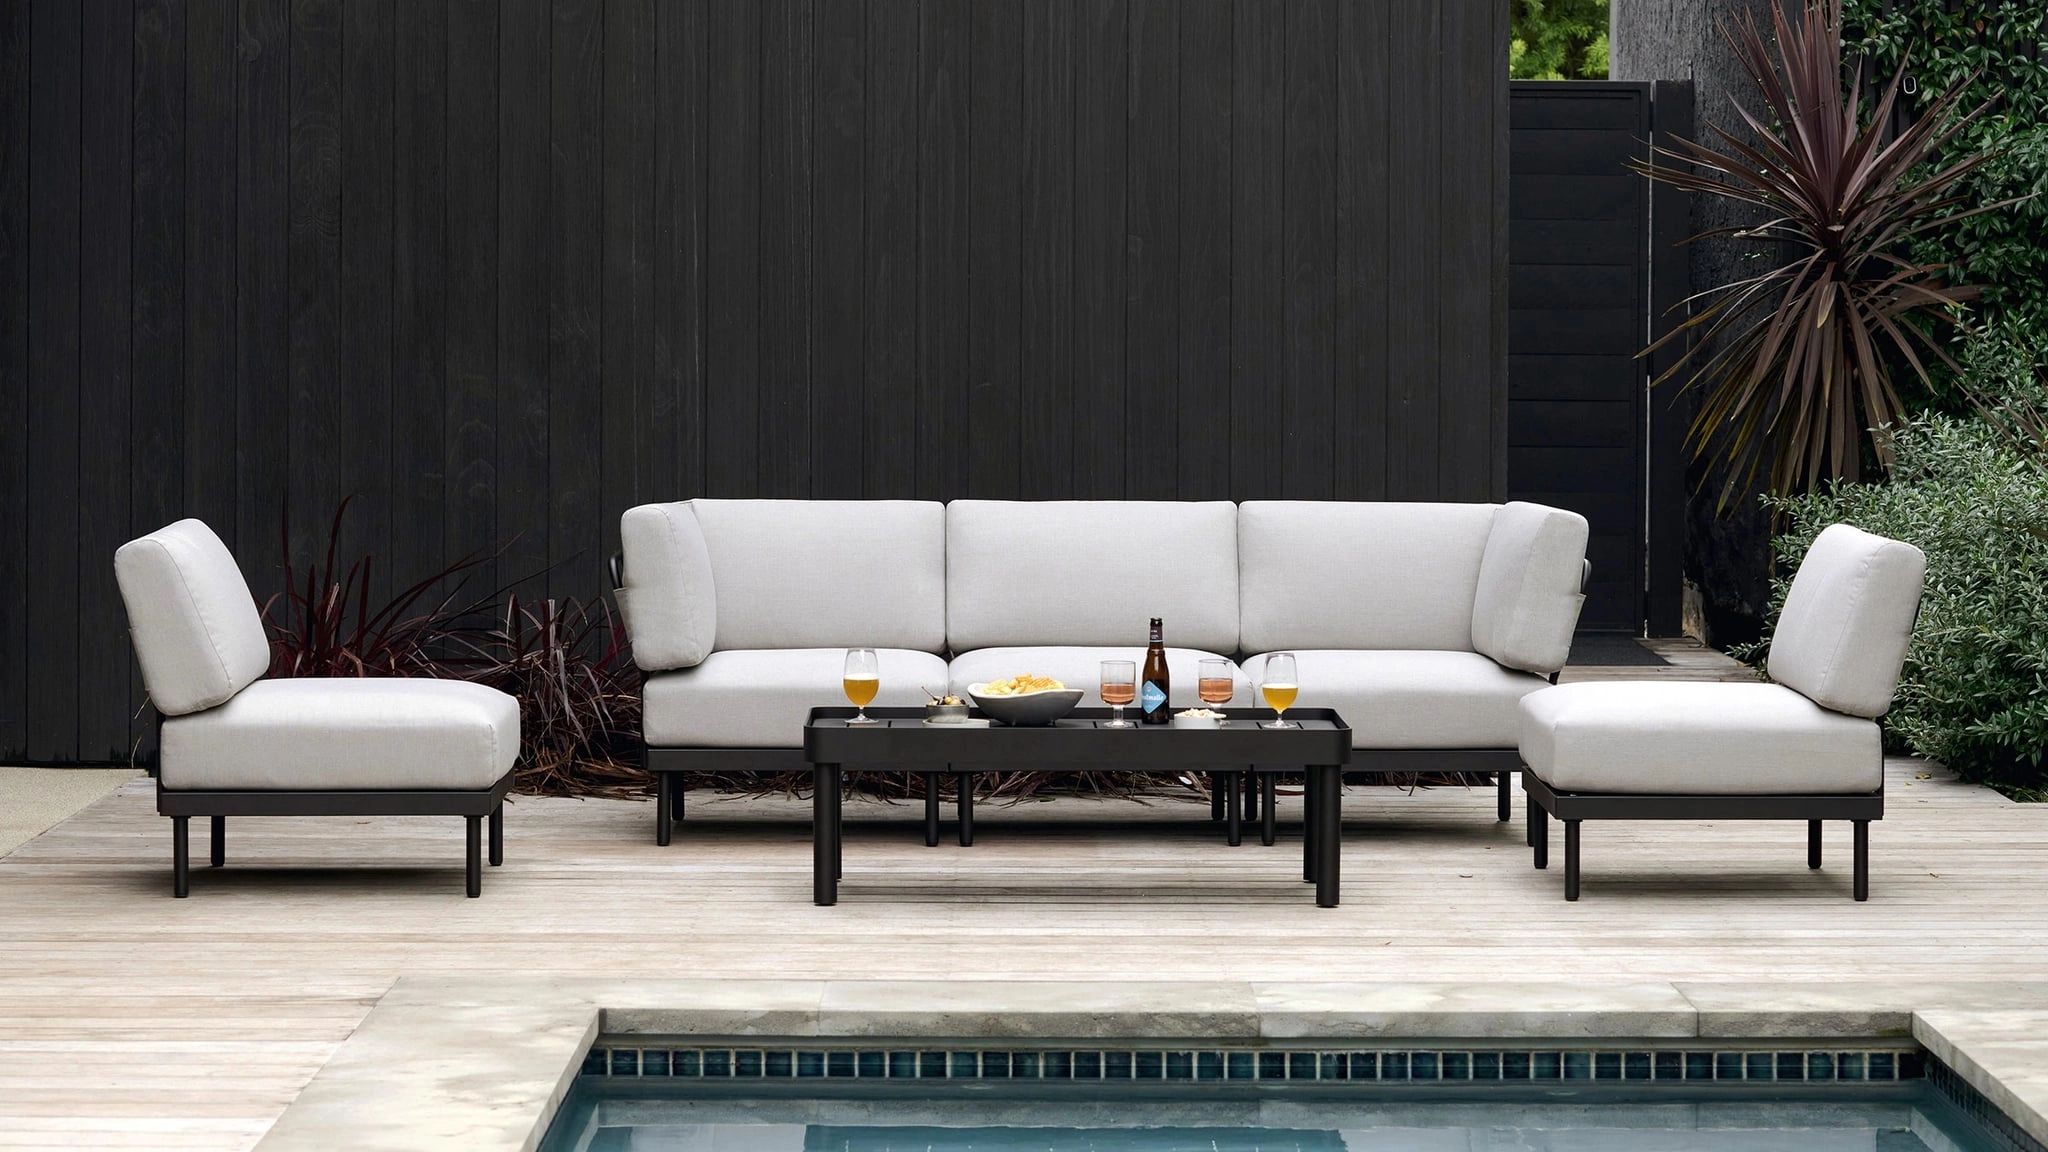 The Best Modern Outdoor Furniture For Patios And Backyards | Popsugar Home Within Textilene Bistro Set Modern Conversation Set (View 7 of 15)